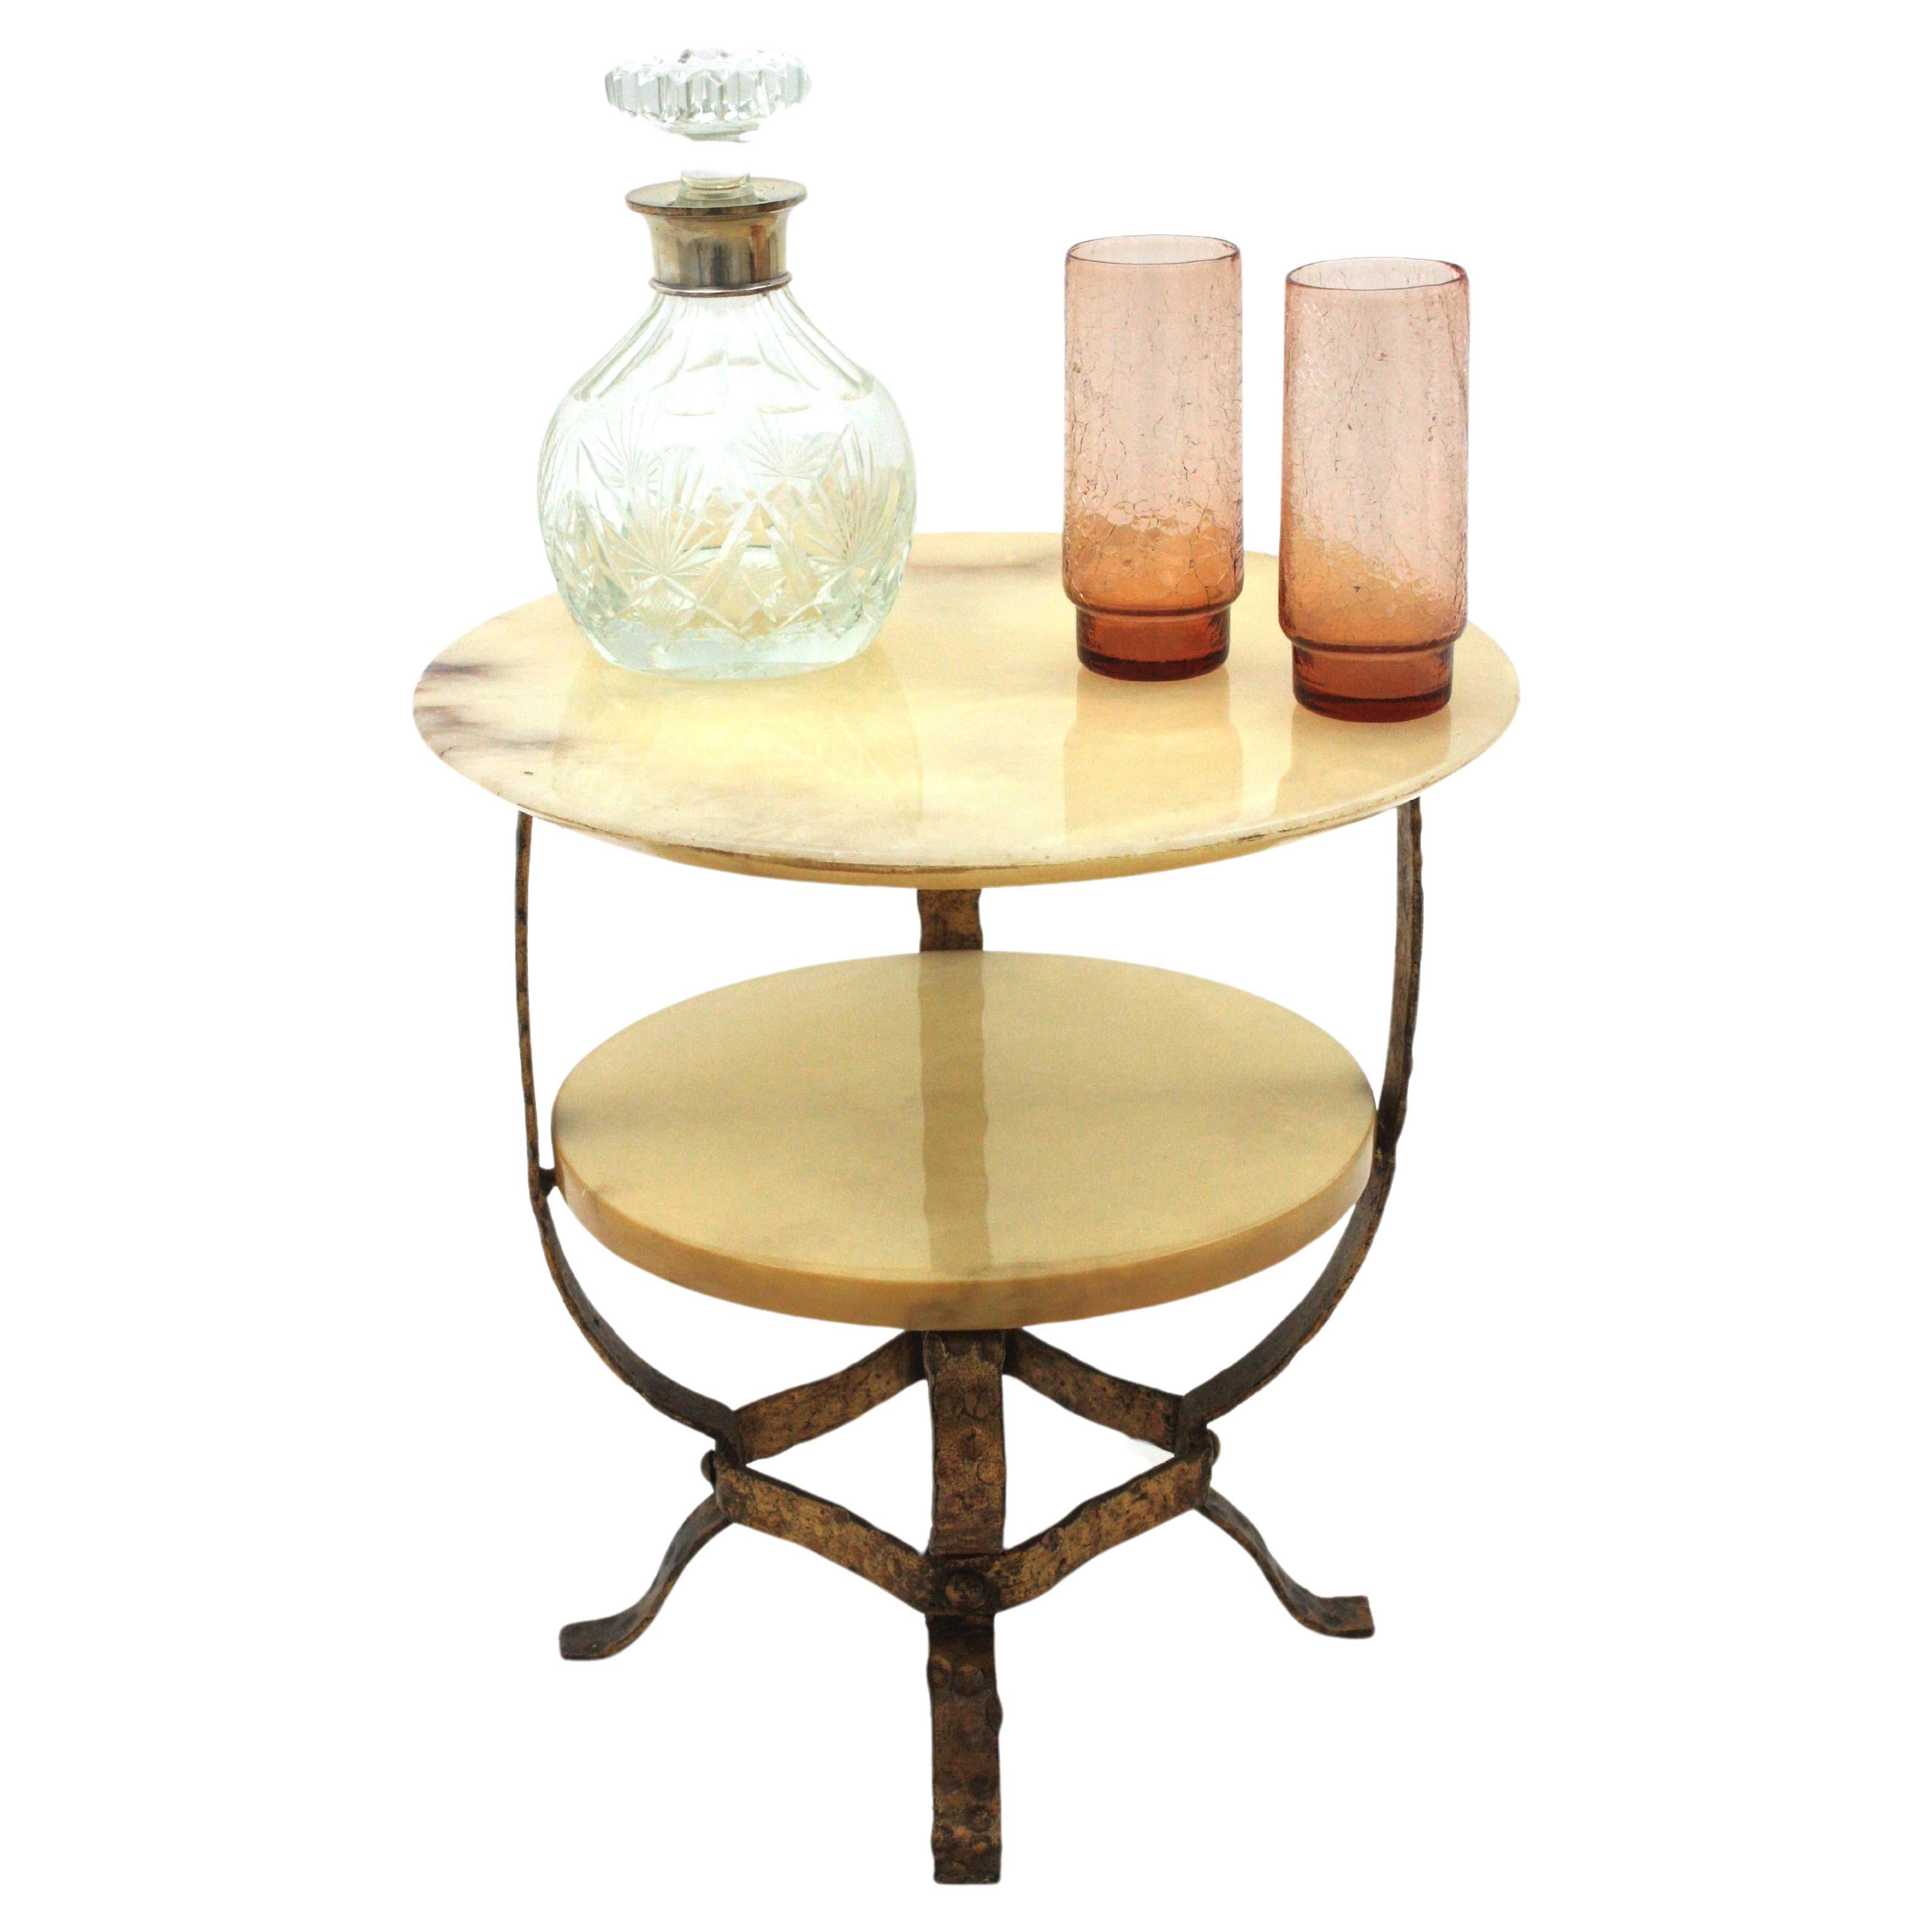 Mid-Century Modern Round Coffee Table or Side Table, Alabaster, Gilt Iron.  Spain, 1950s.
Eye-catching wrought iron low table with two levels in alabaster and hammered gilt iron base. 
An interesting combination of materials is used to create this